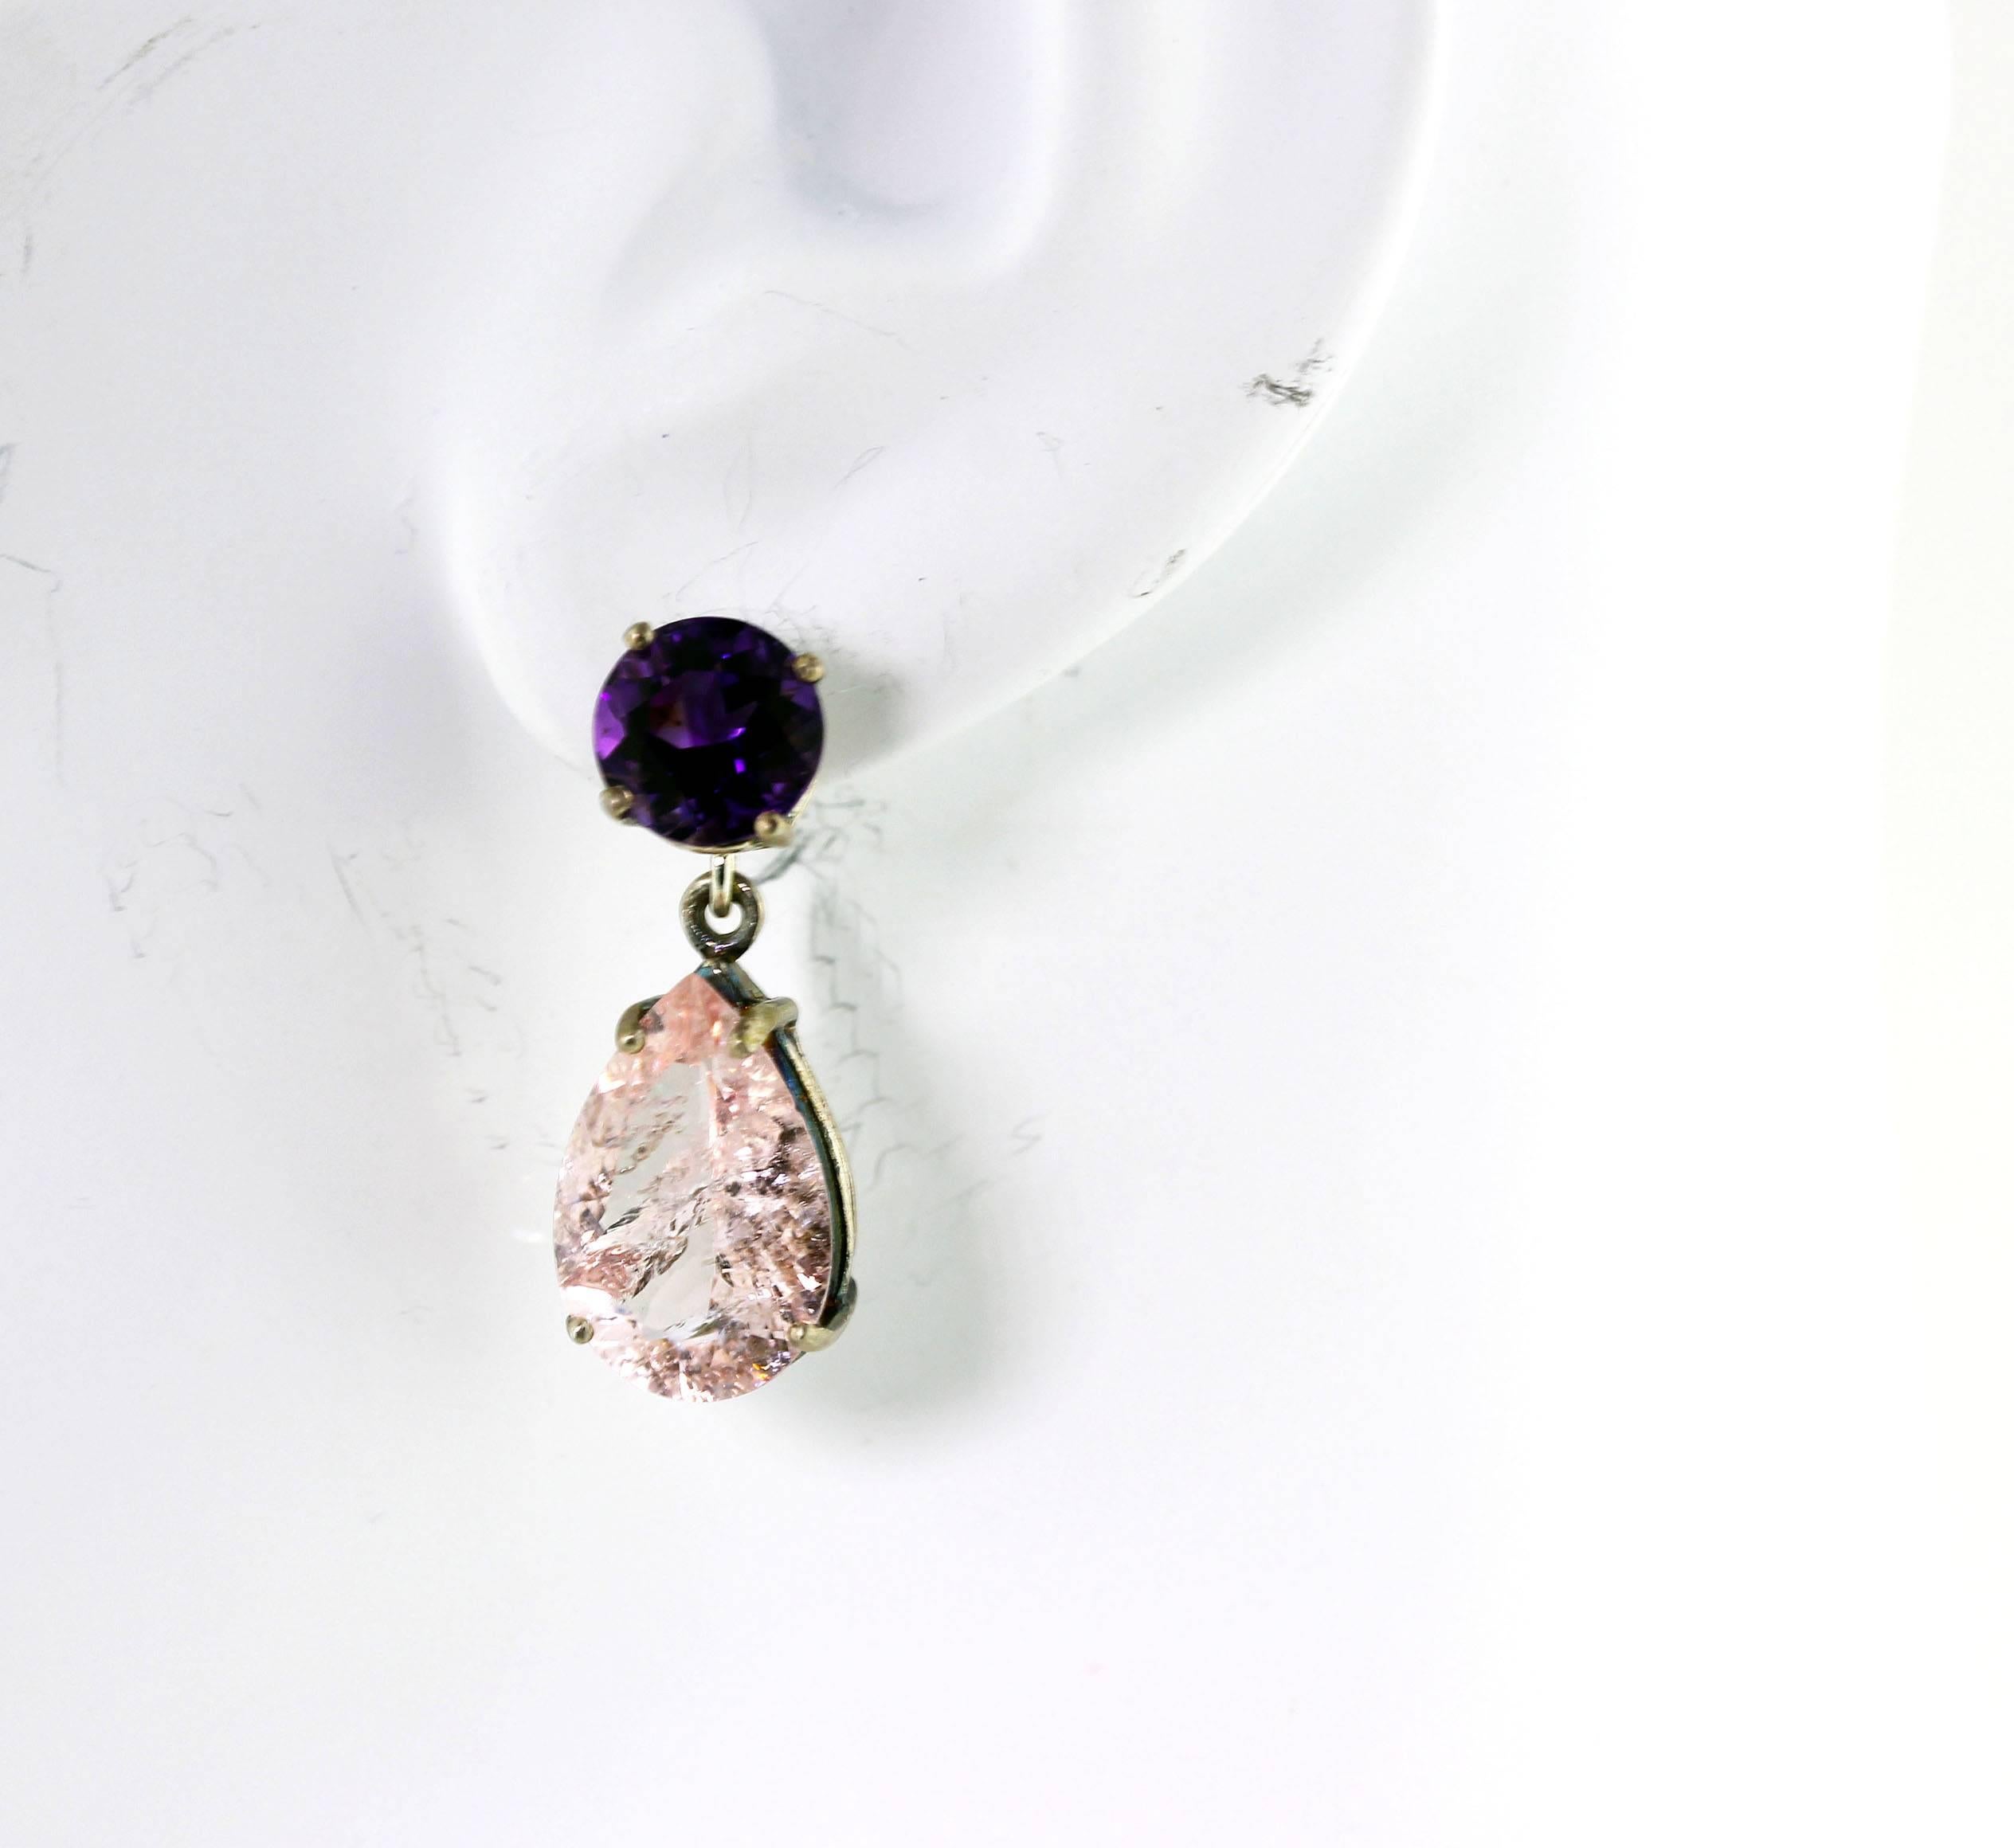 1.64 carats each of round (8mm) gem cut brilliant Amethyst with bright pink flashes dangle 5.4 carats each of sparkling krinkle (naturally included) Morganite (15 mm x 10 mm) in sterling silver stud earrings.  They measure 1 inch long.  The